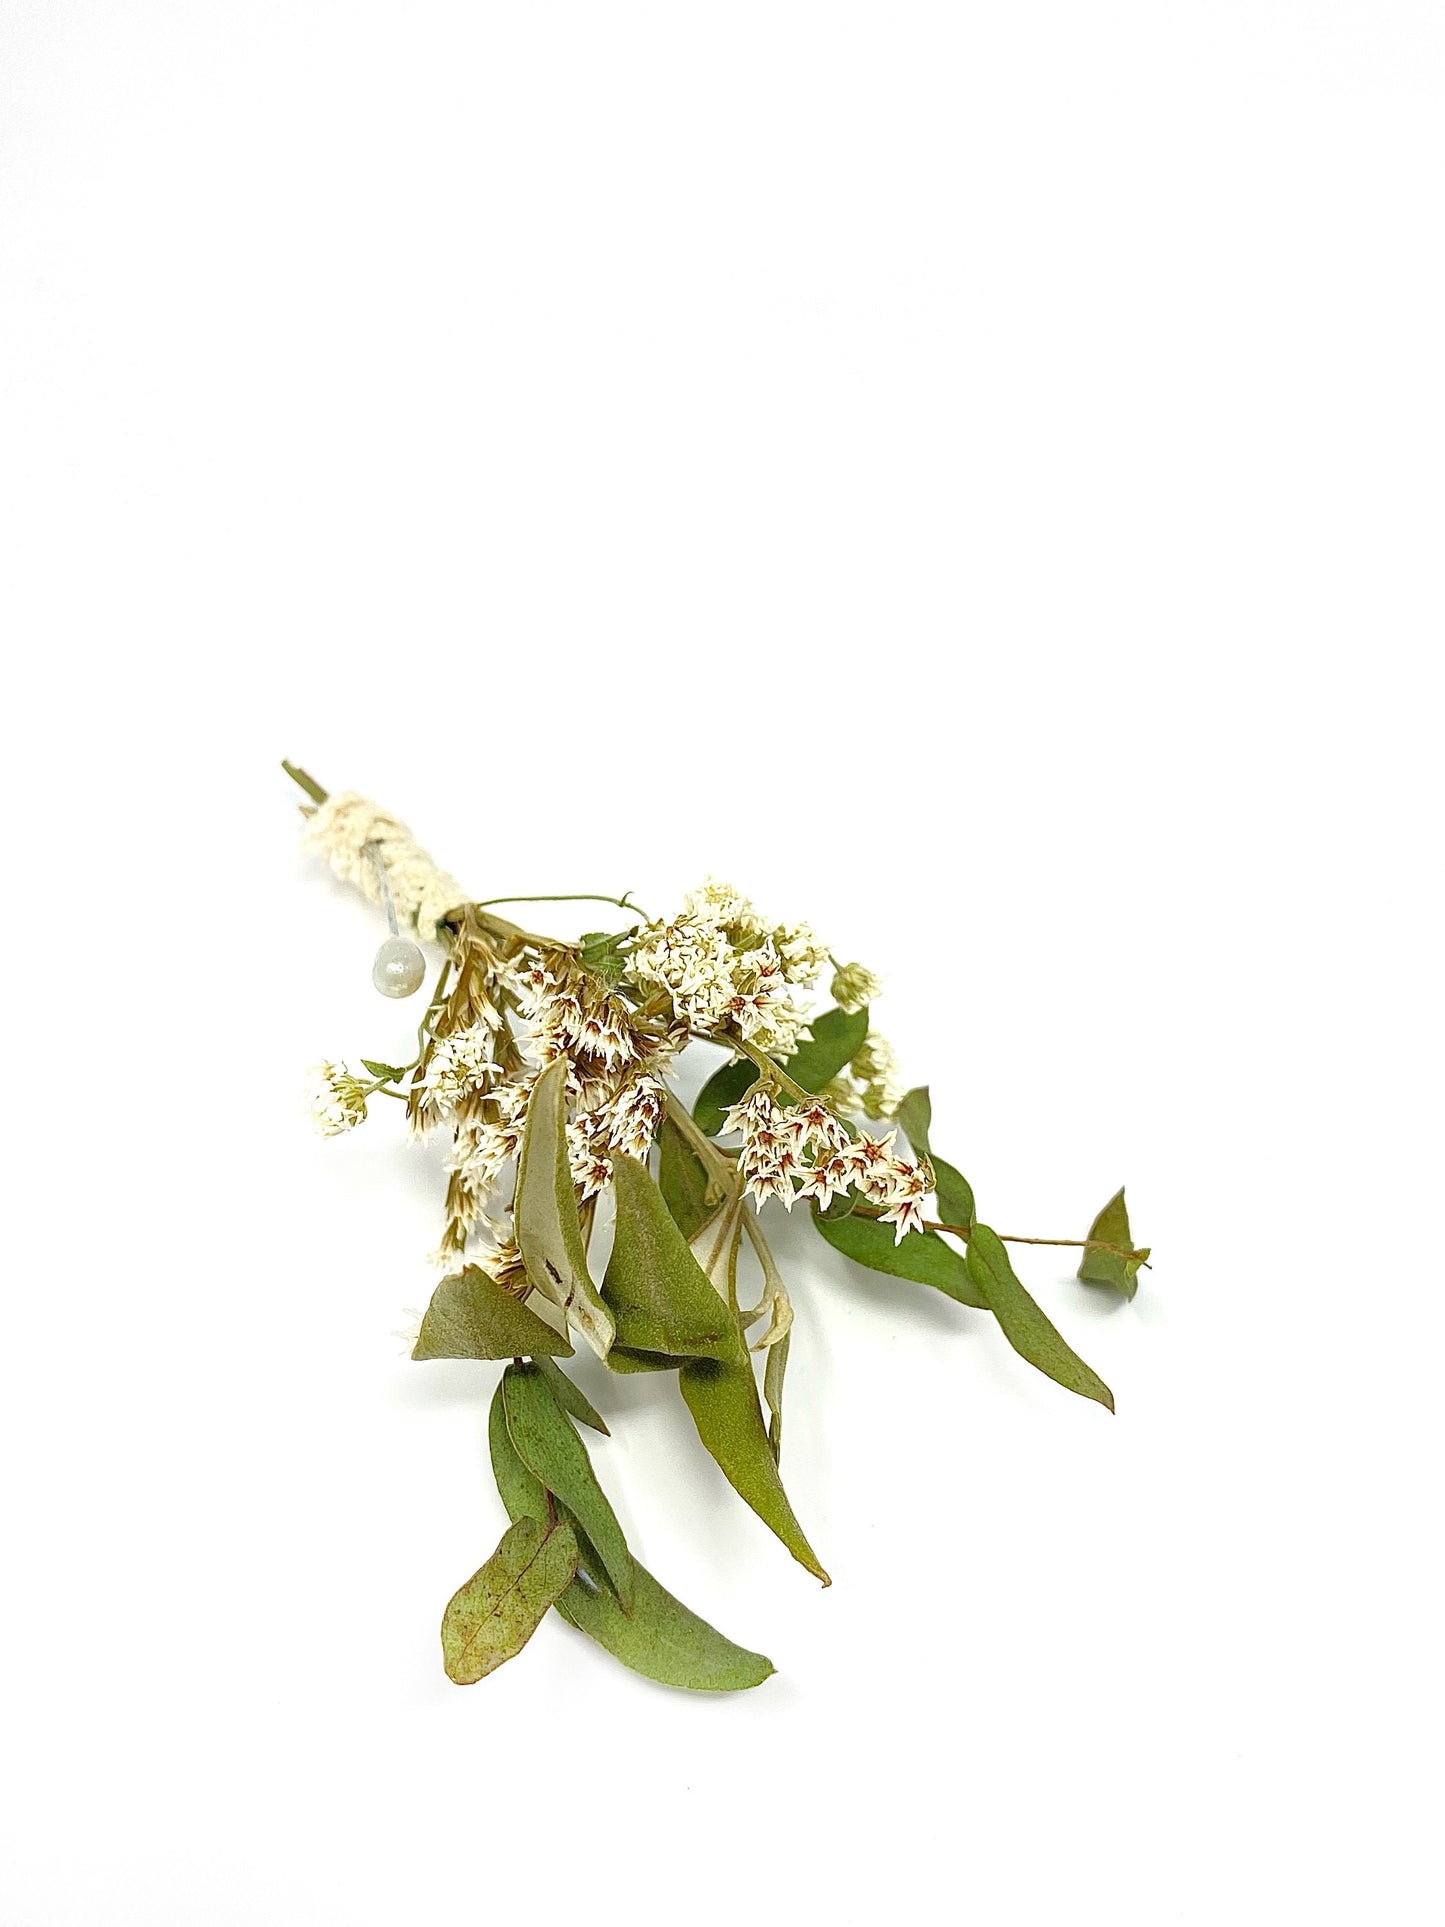 Wedding Boutonniere, Dried Flowers, Preserved Flowers, Bridal Accessories, Greenery, White and Green, German Statice